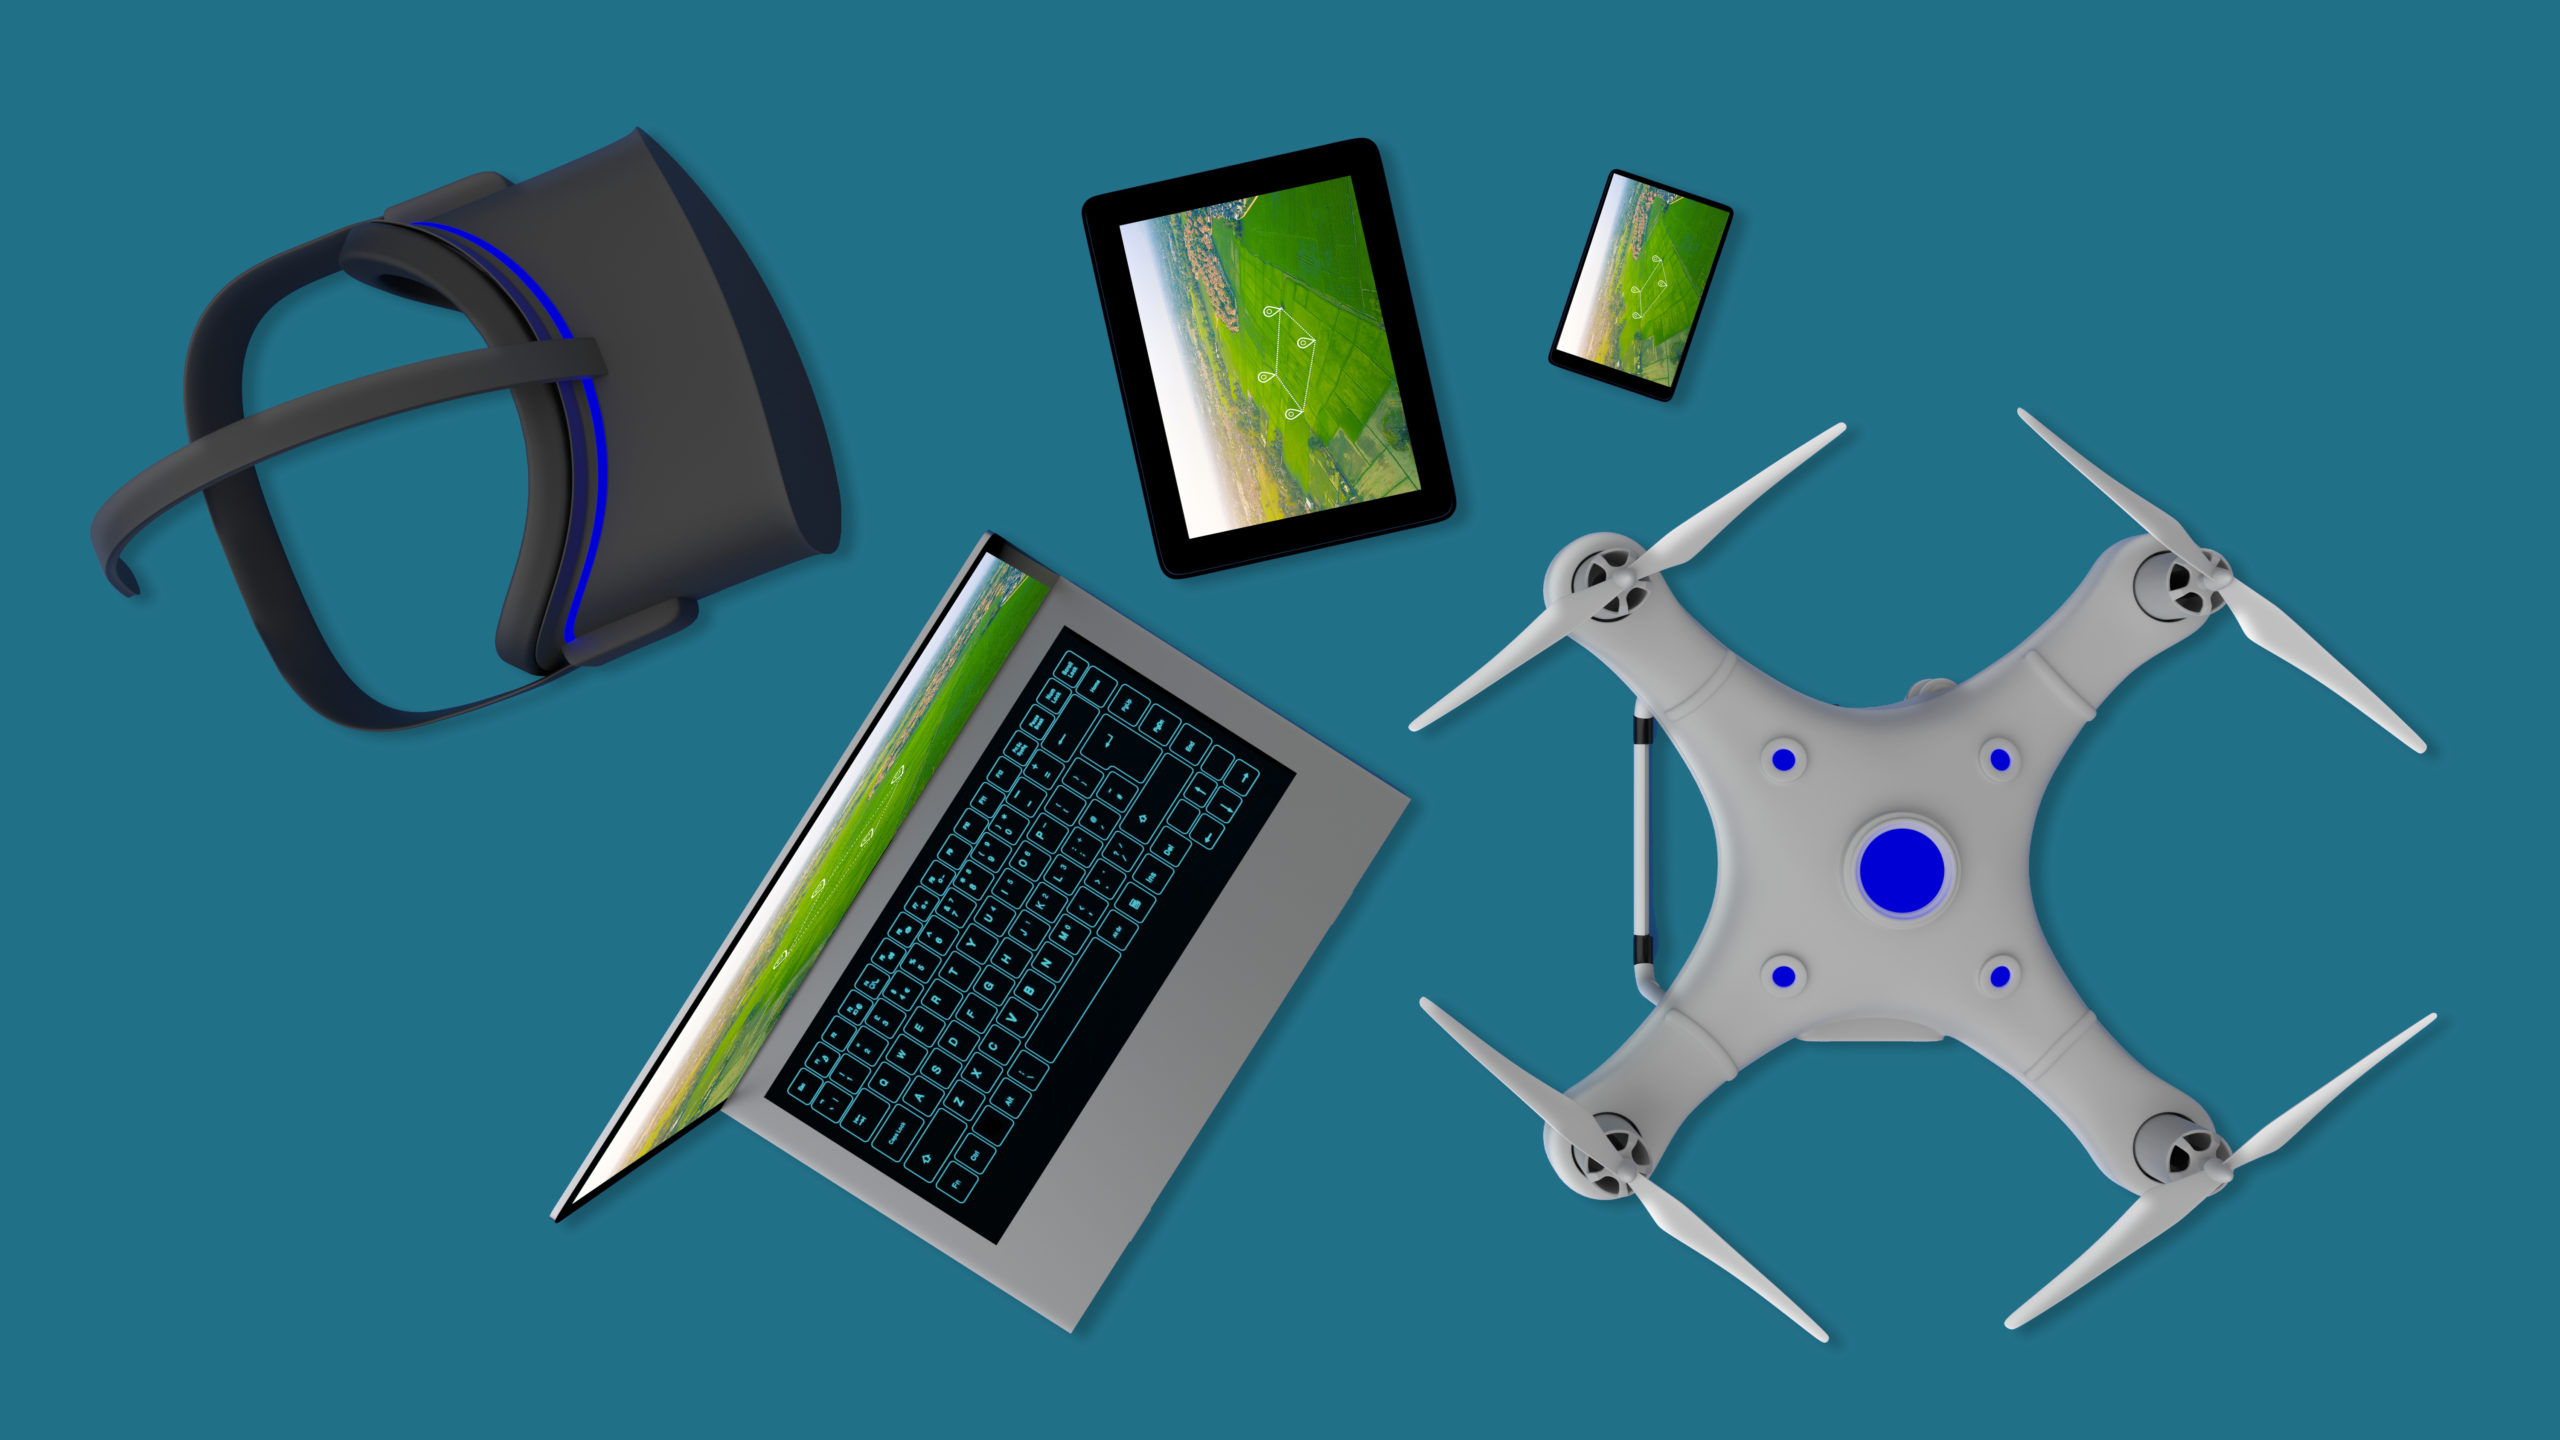 A drone, laptop, tablet, smartphone, and FPV headset